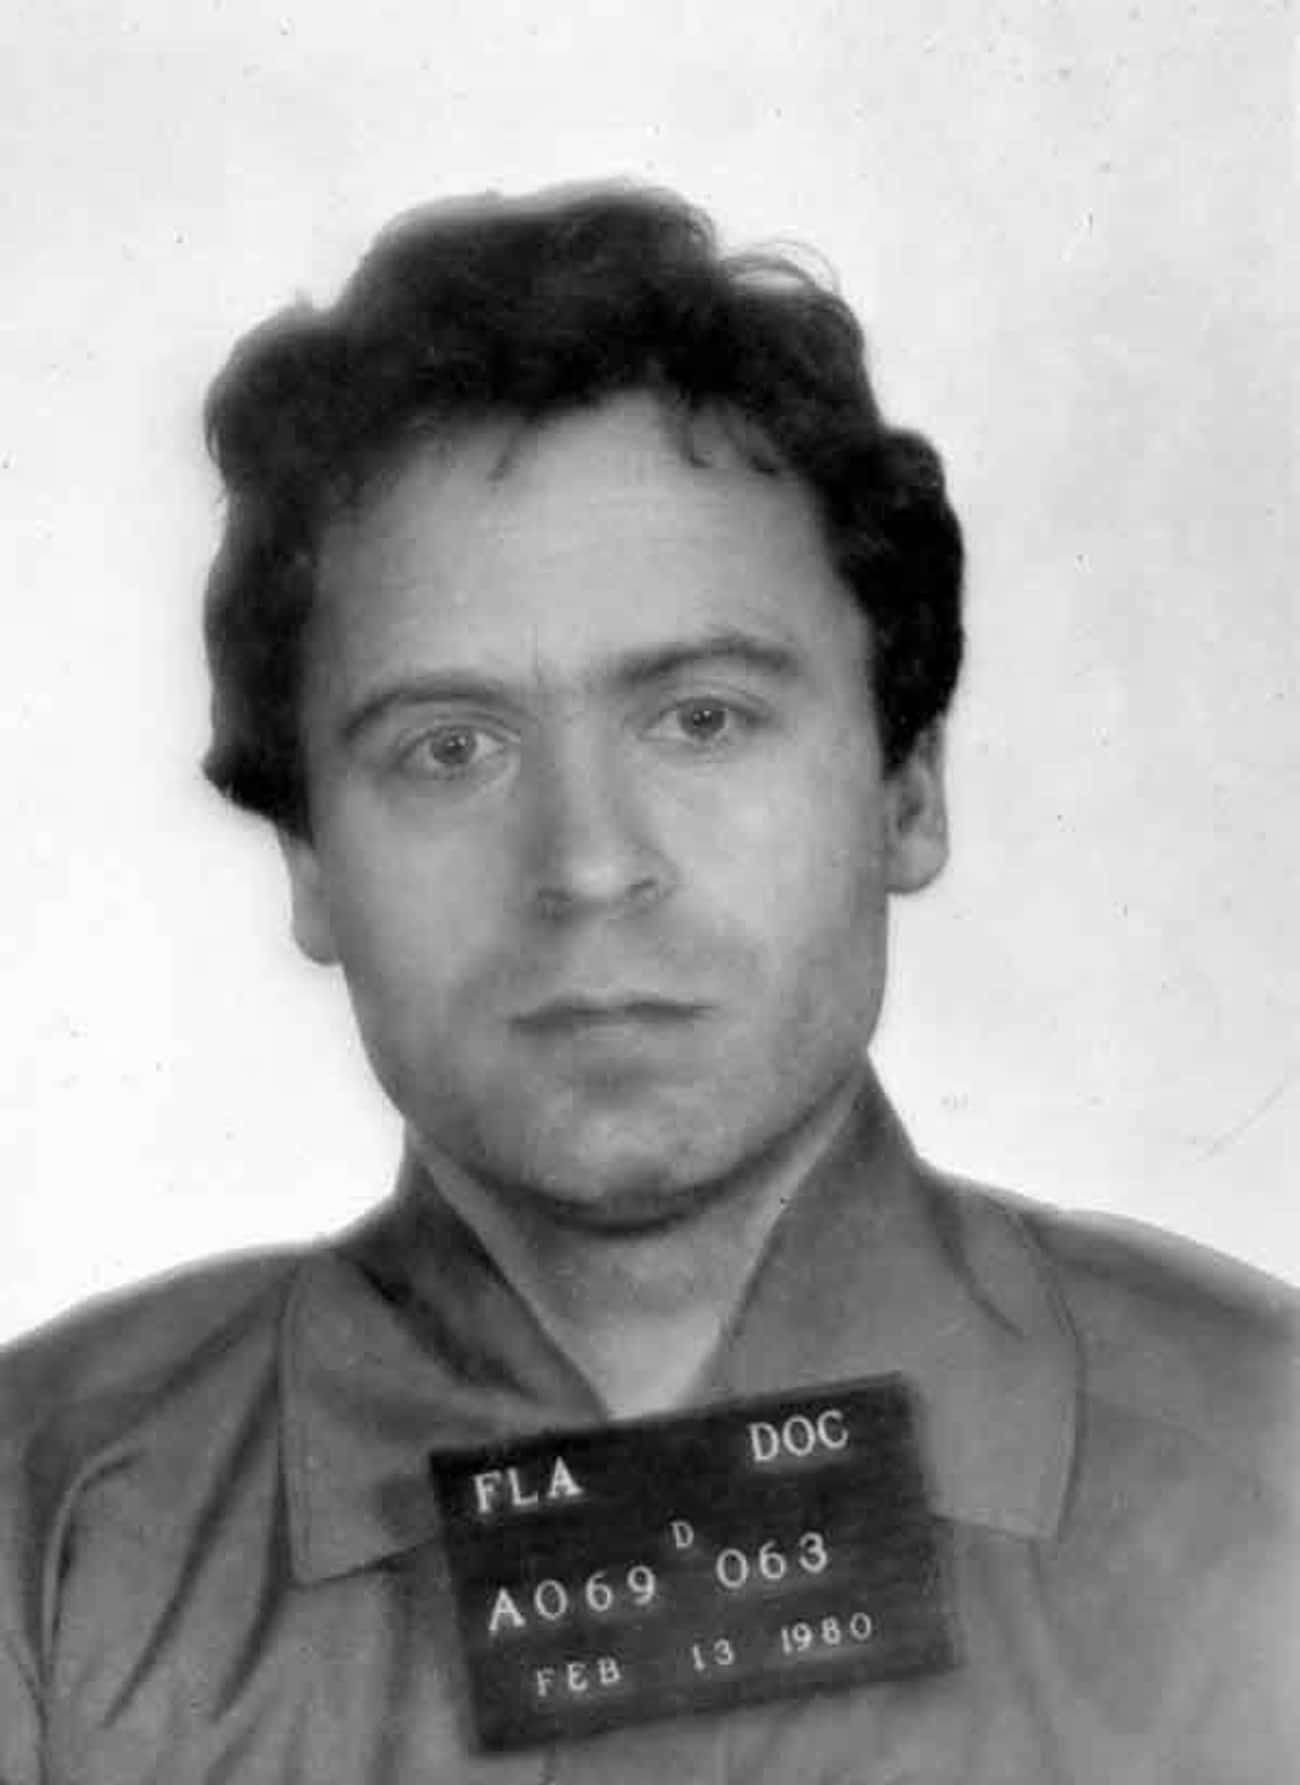 Ted Bundy Lied To His Victims When They Regained Consciousness